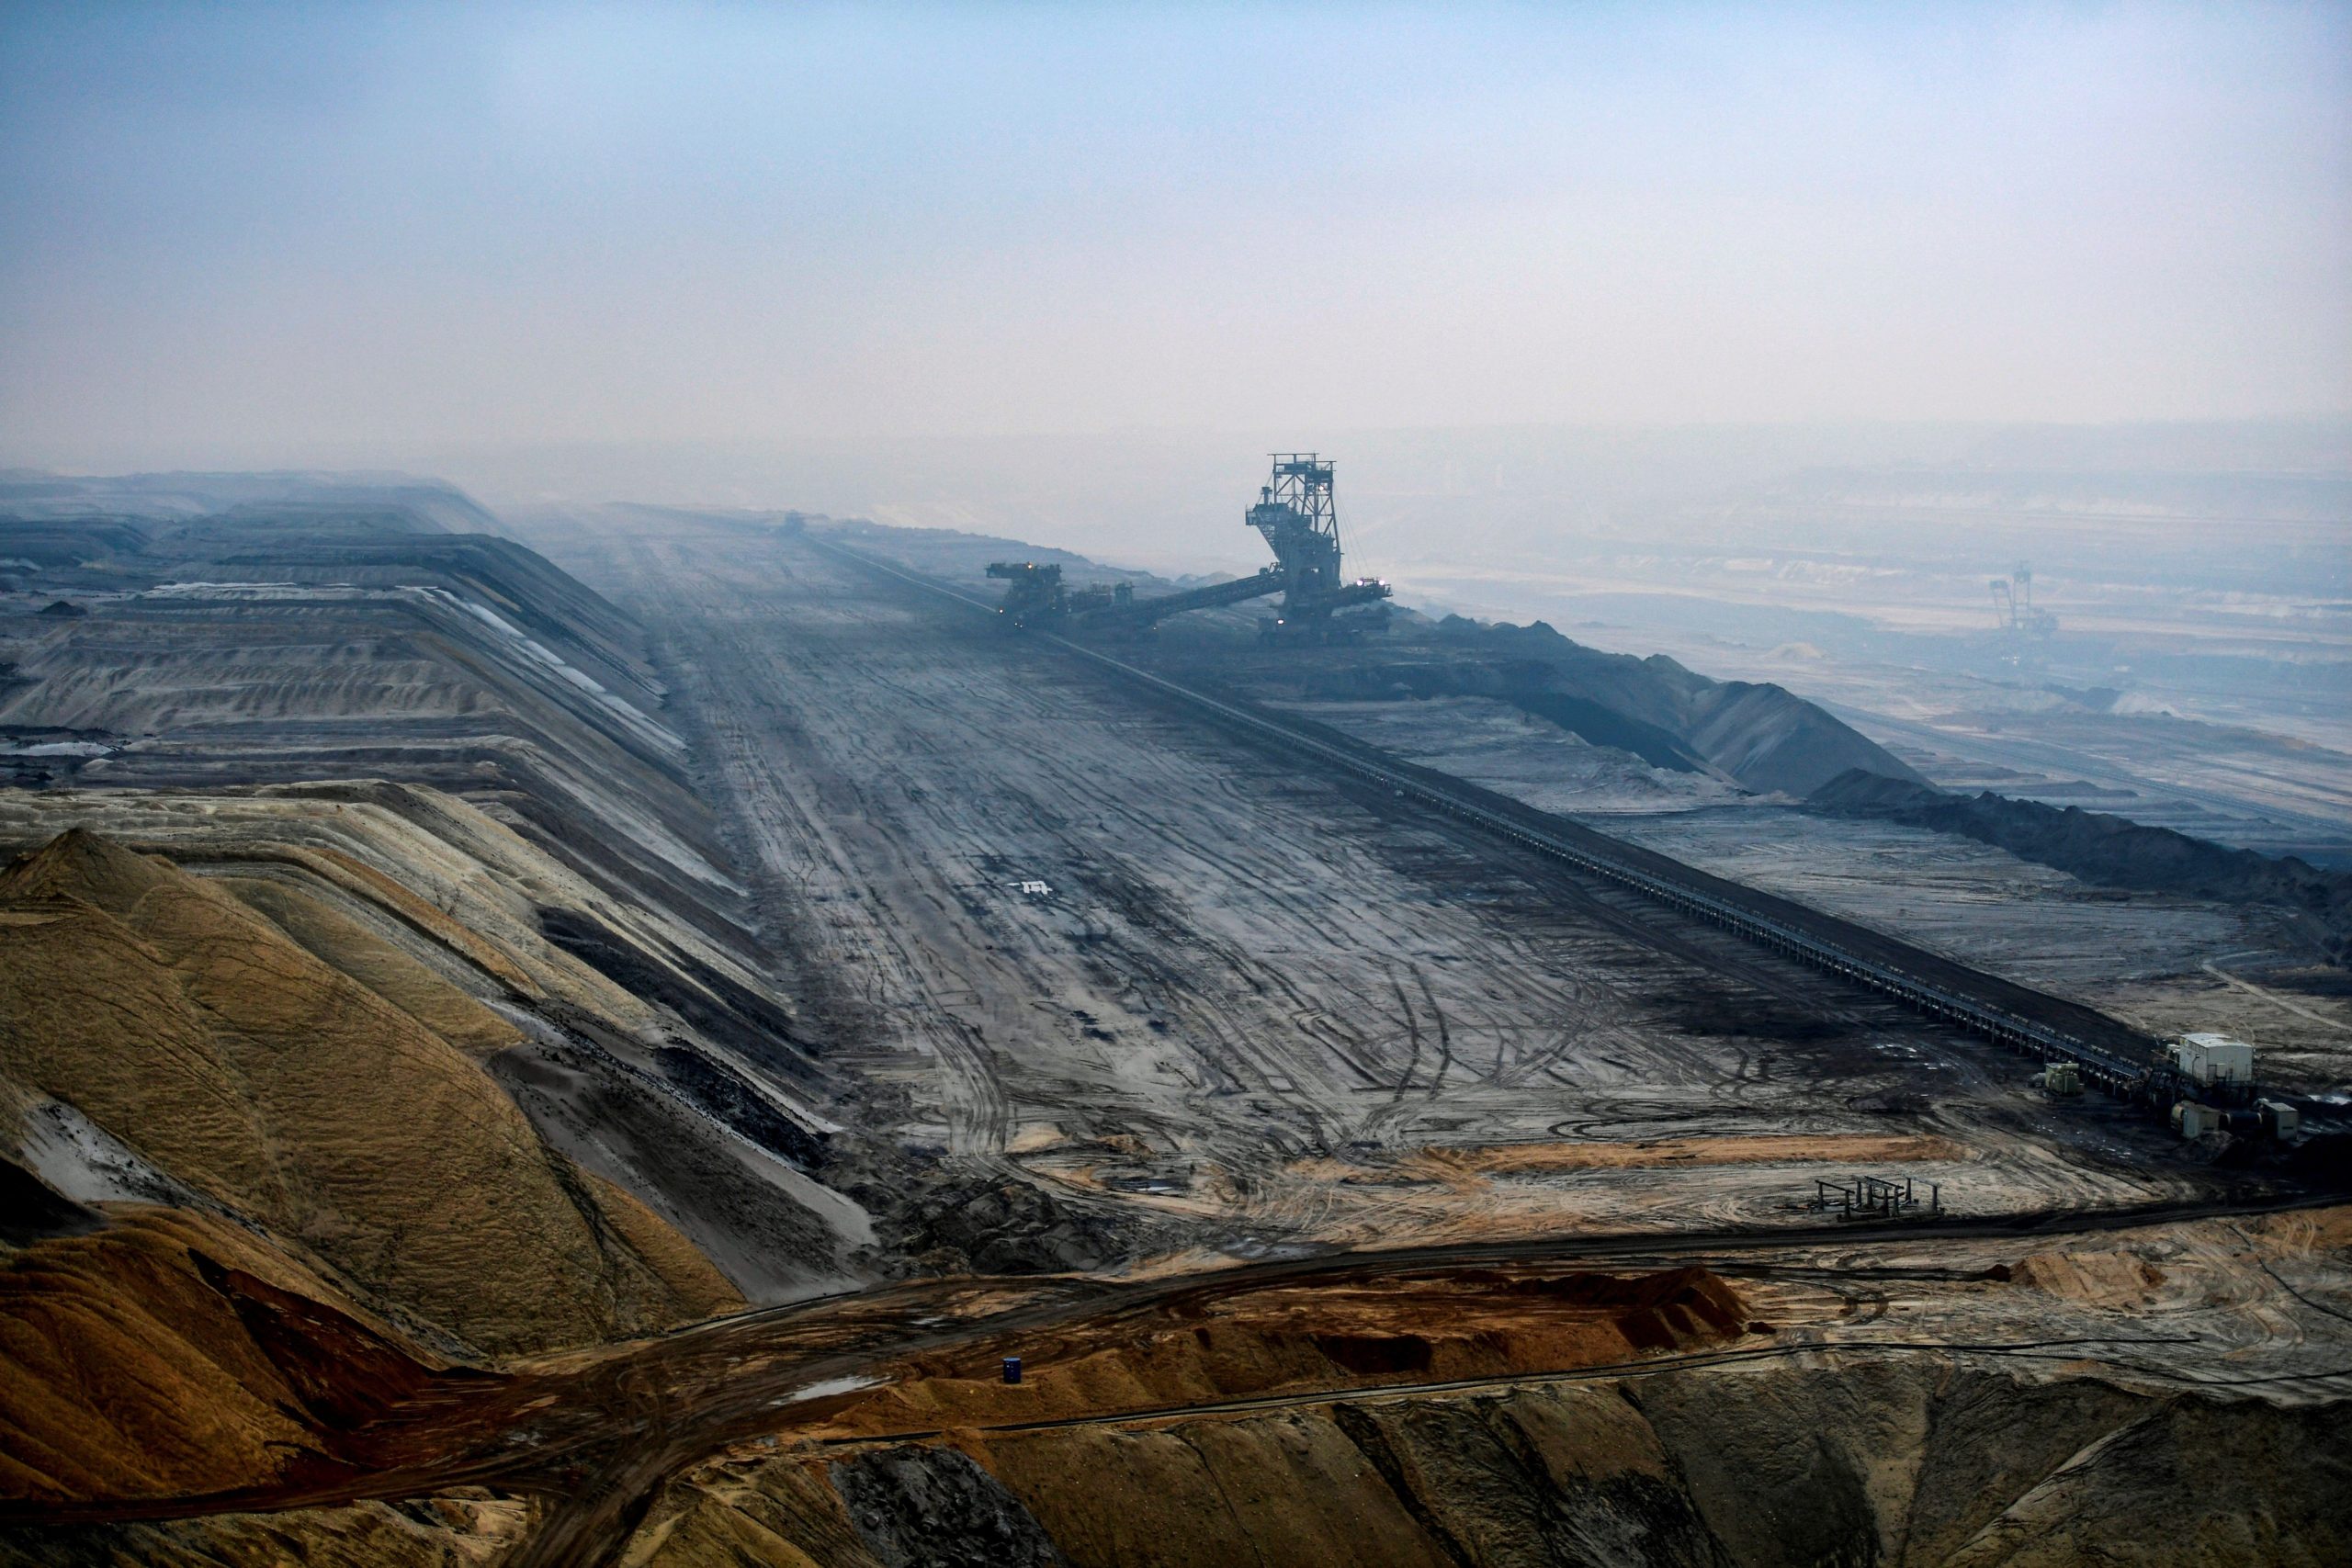 A bucket wheel excavator is seen at a coal mine in western Germany on Jan. 17. (Ina Fassbender/AFP via Getty Images)